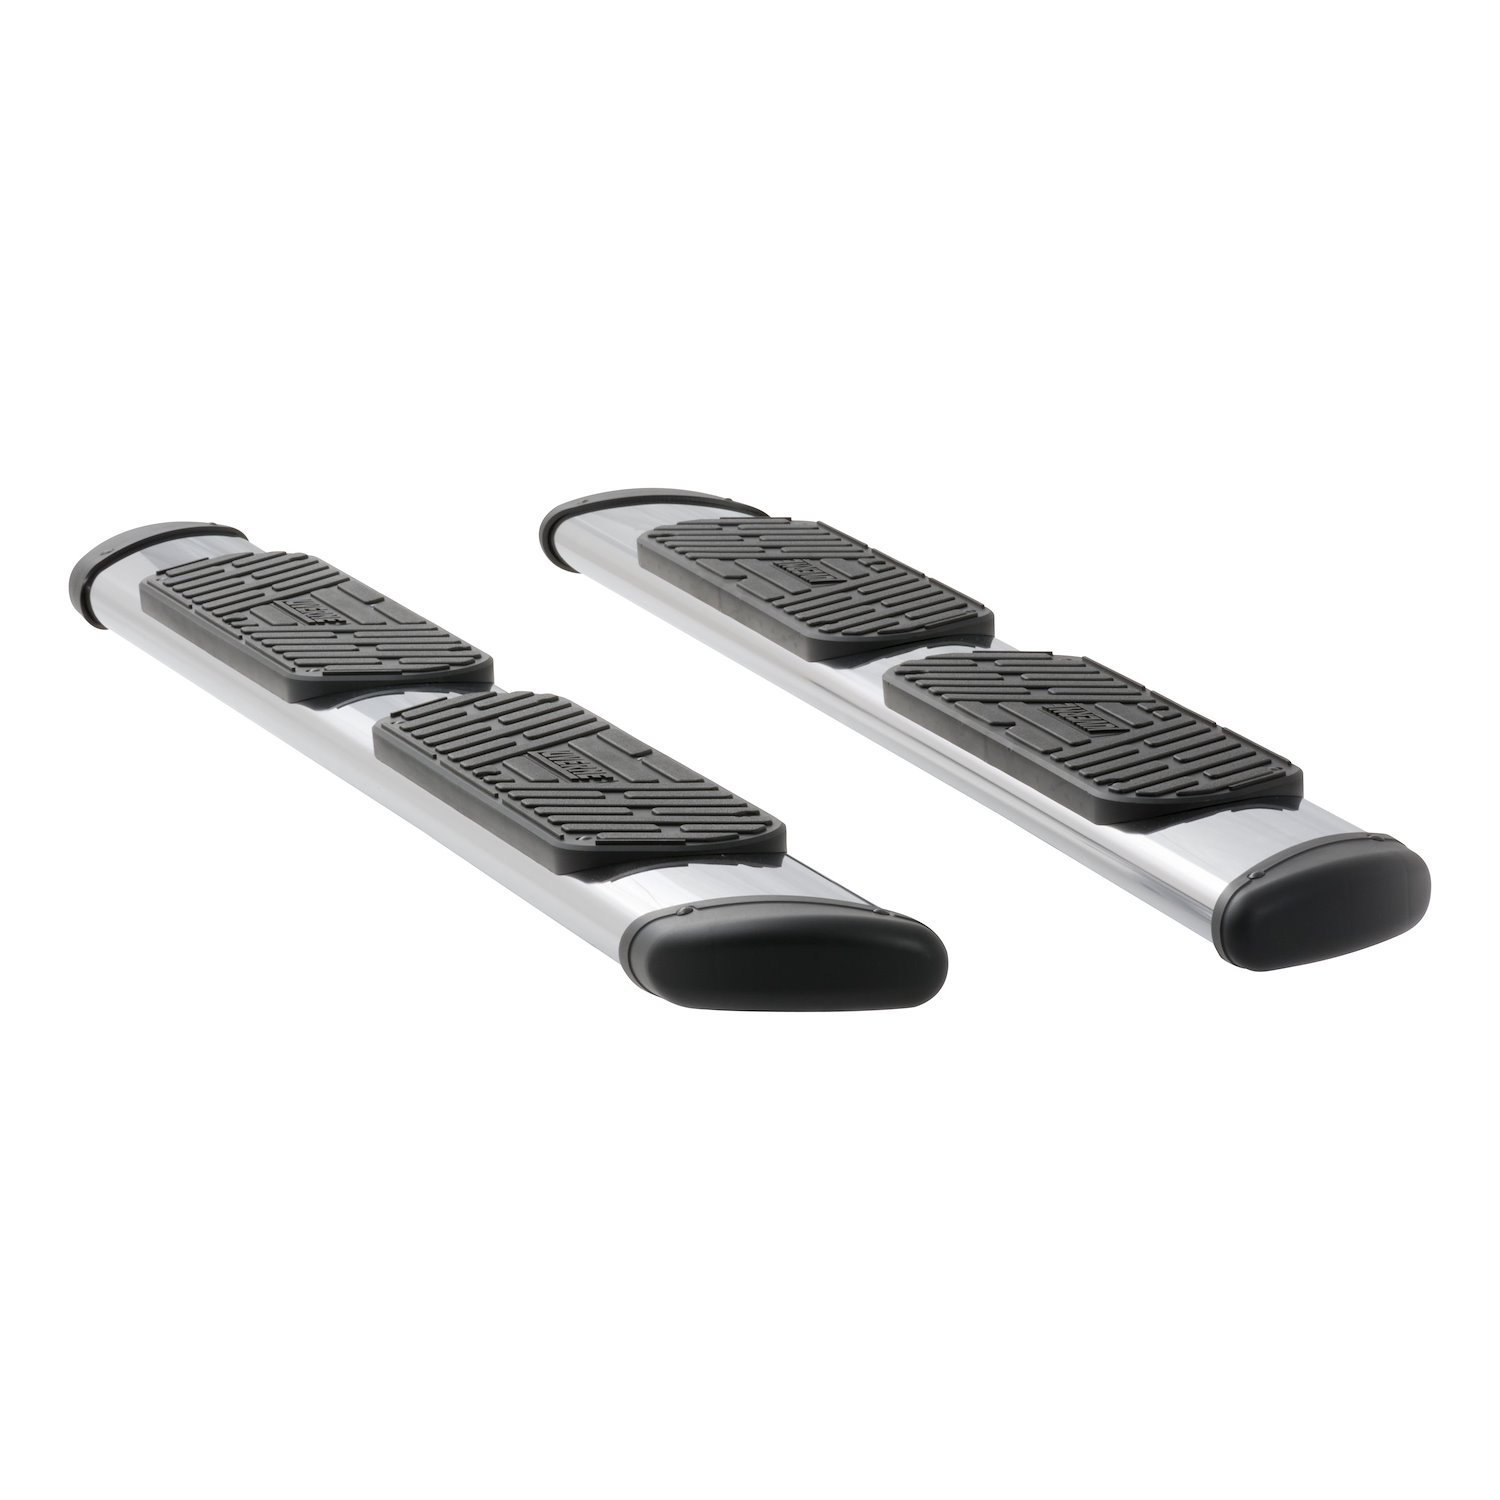 477078-401232 Regal 7 Polished Stainless 78 in. Oval Side Steps Fits Select Dodge, Ram 1500 Quad Cab